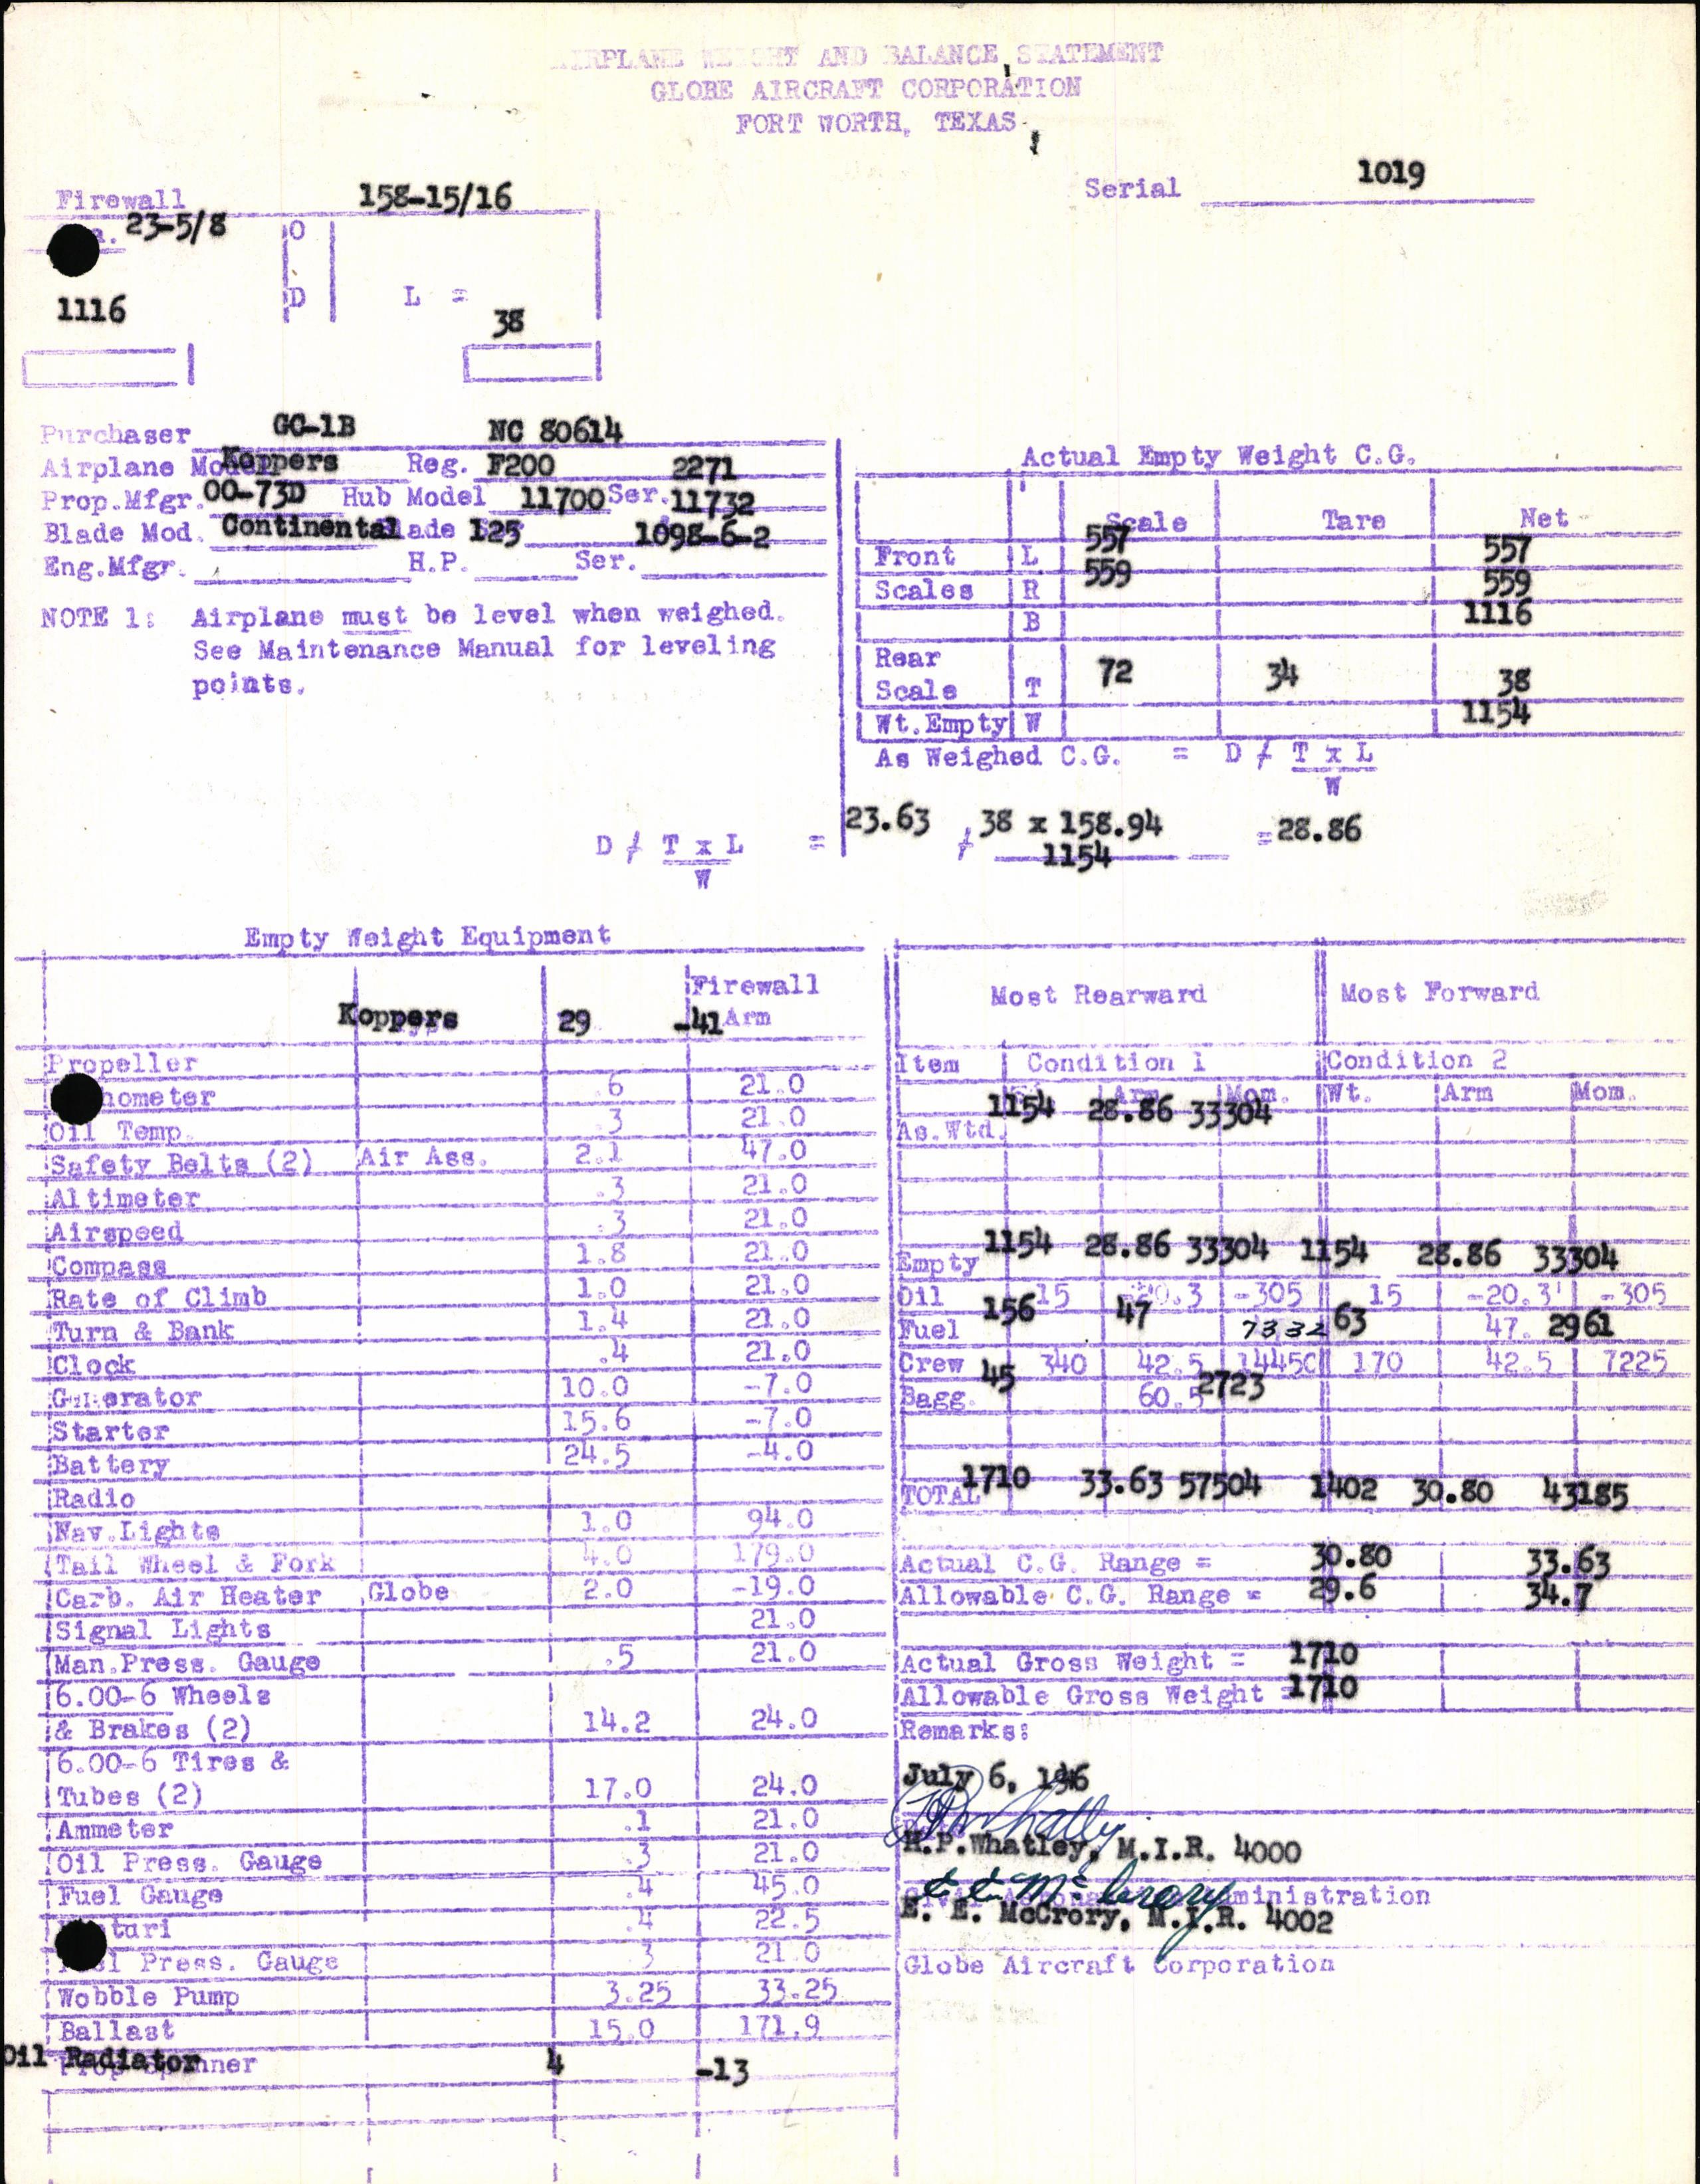 Sample page 7 from AirCorps Library document: Technical Information for Serial Number 1019